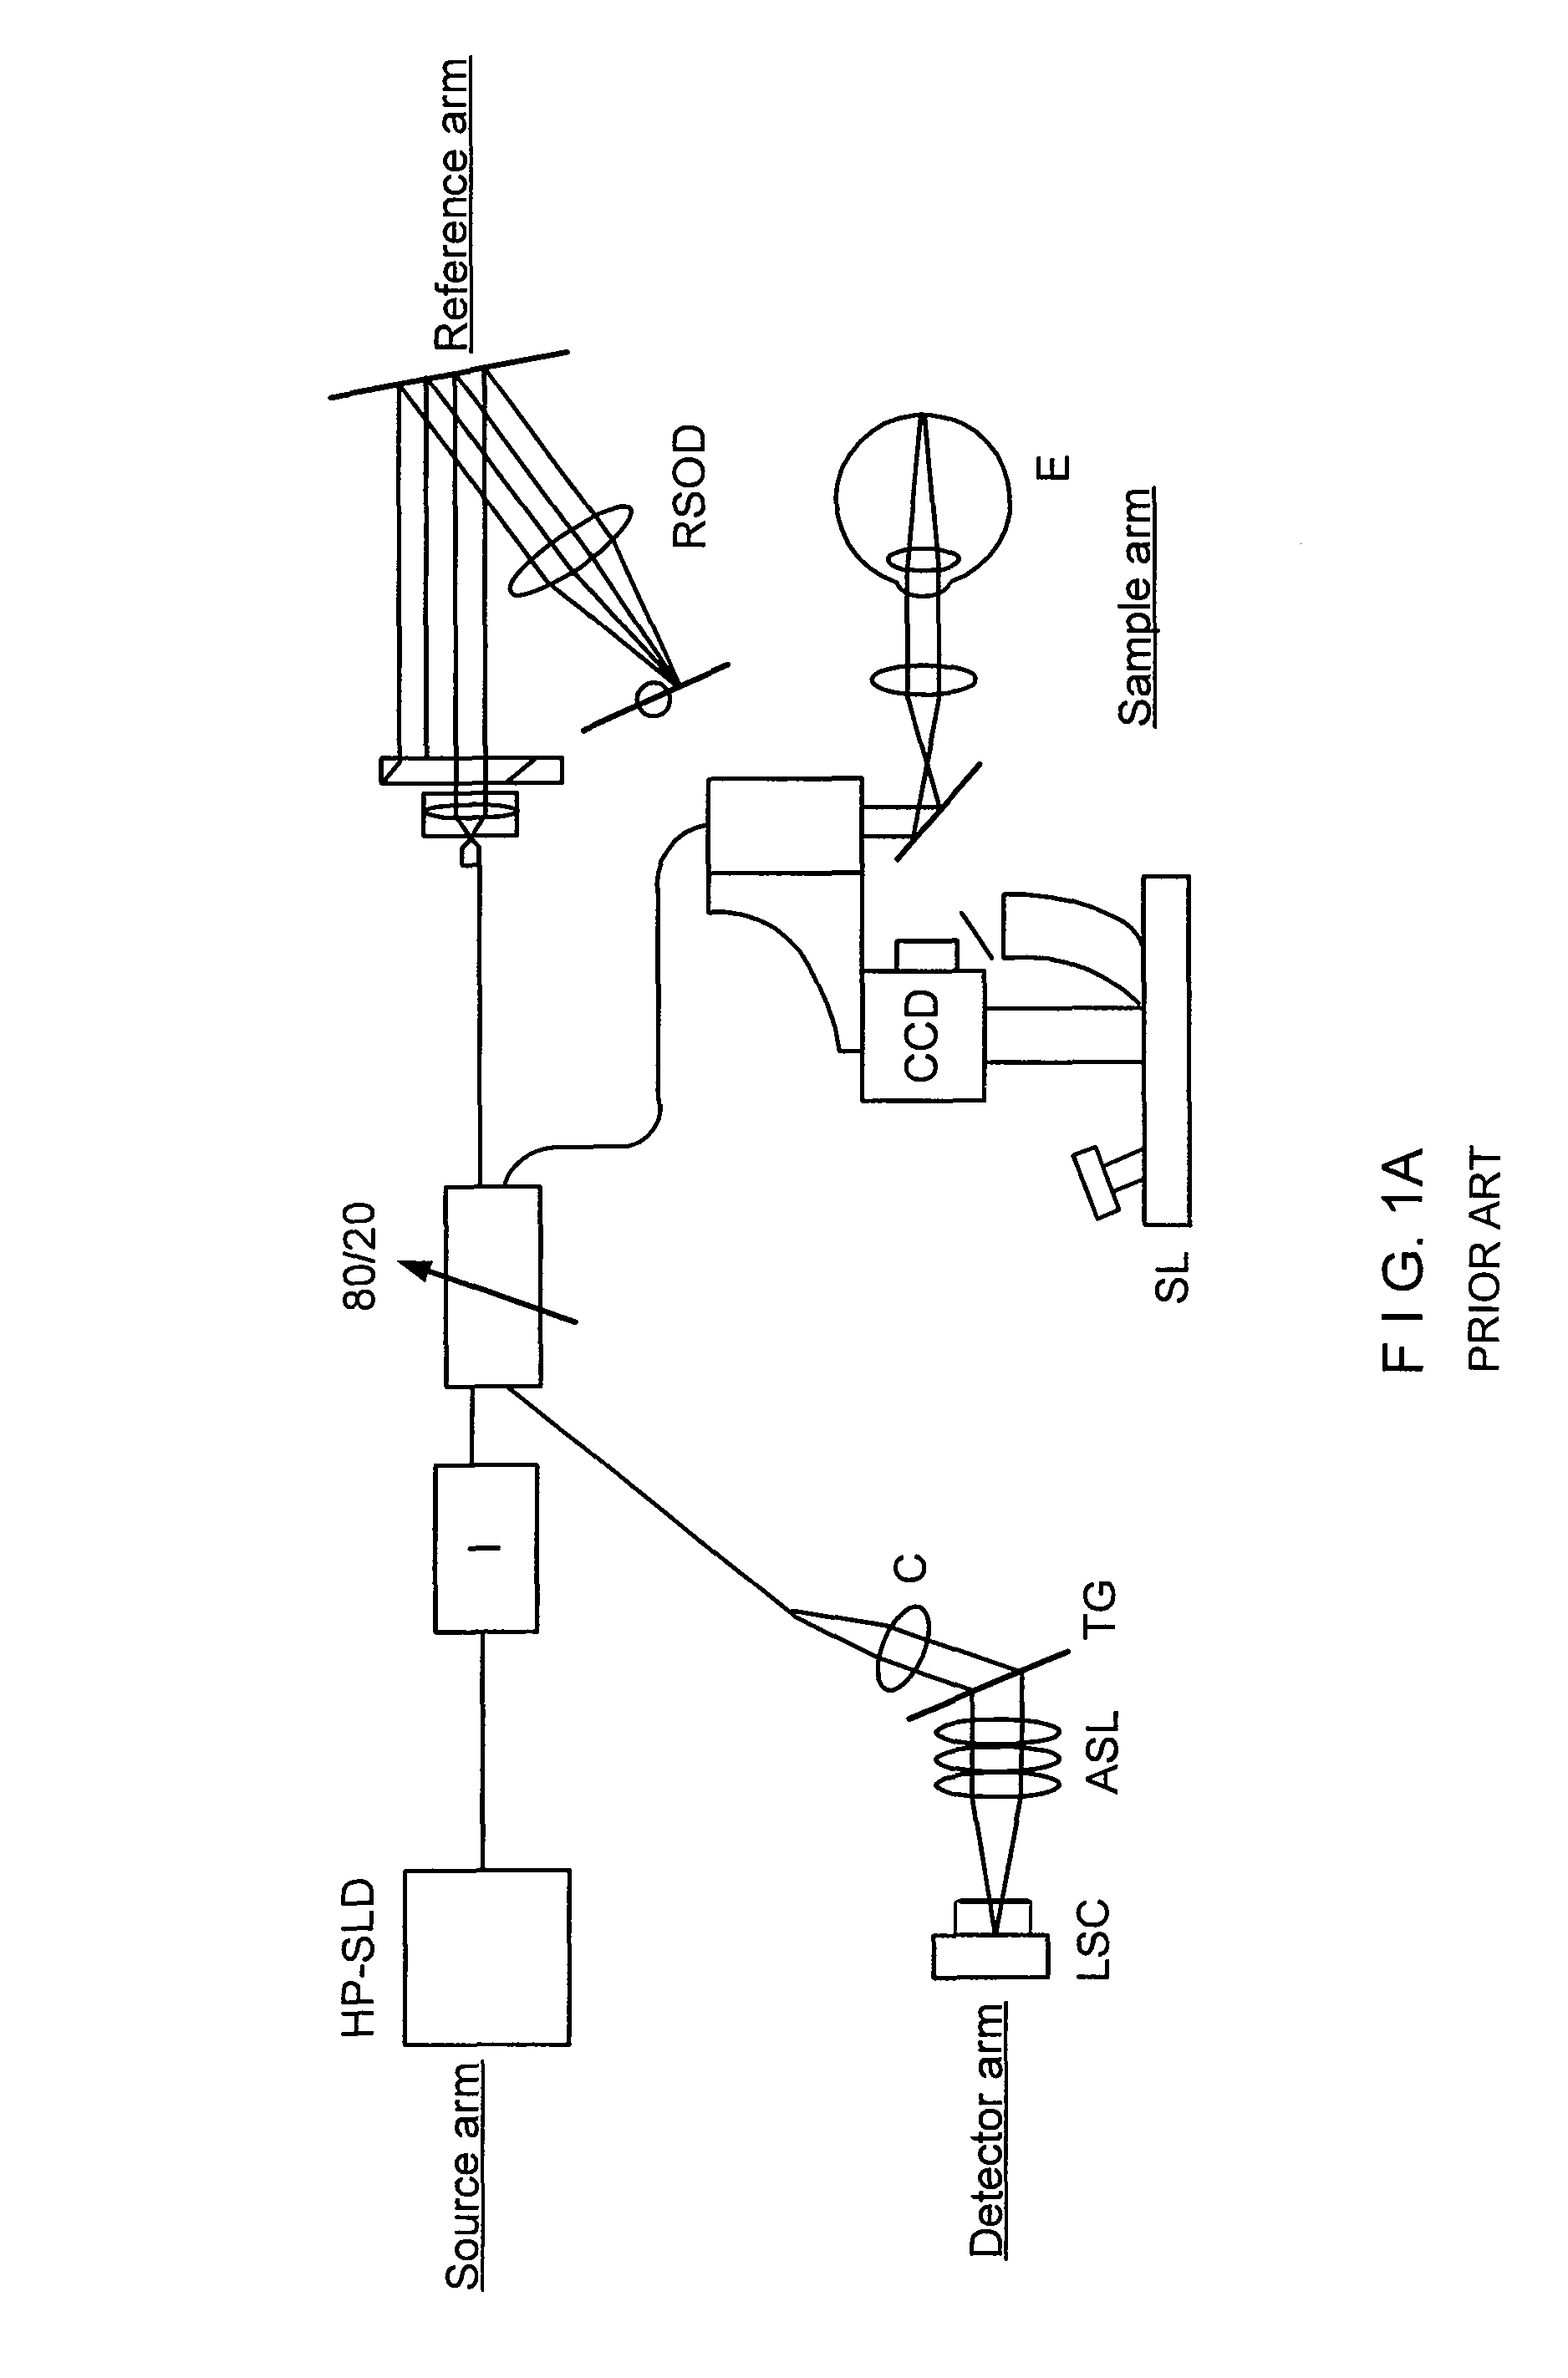 Apparatus and method for controlling ranging depth in optical frequency domain imaging